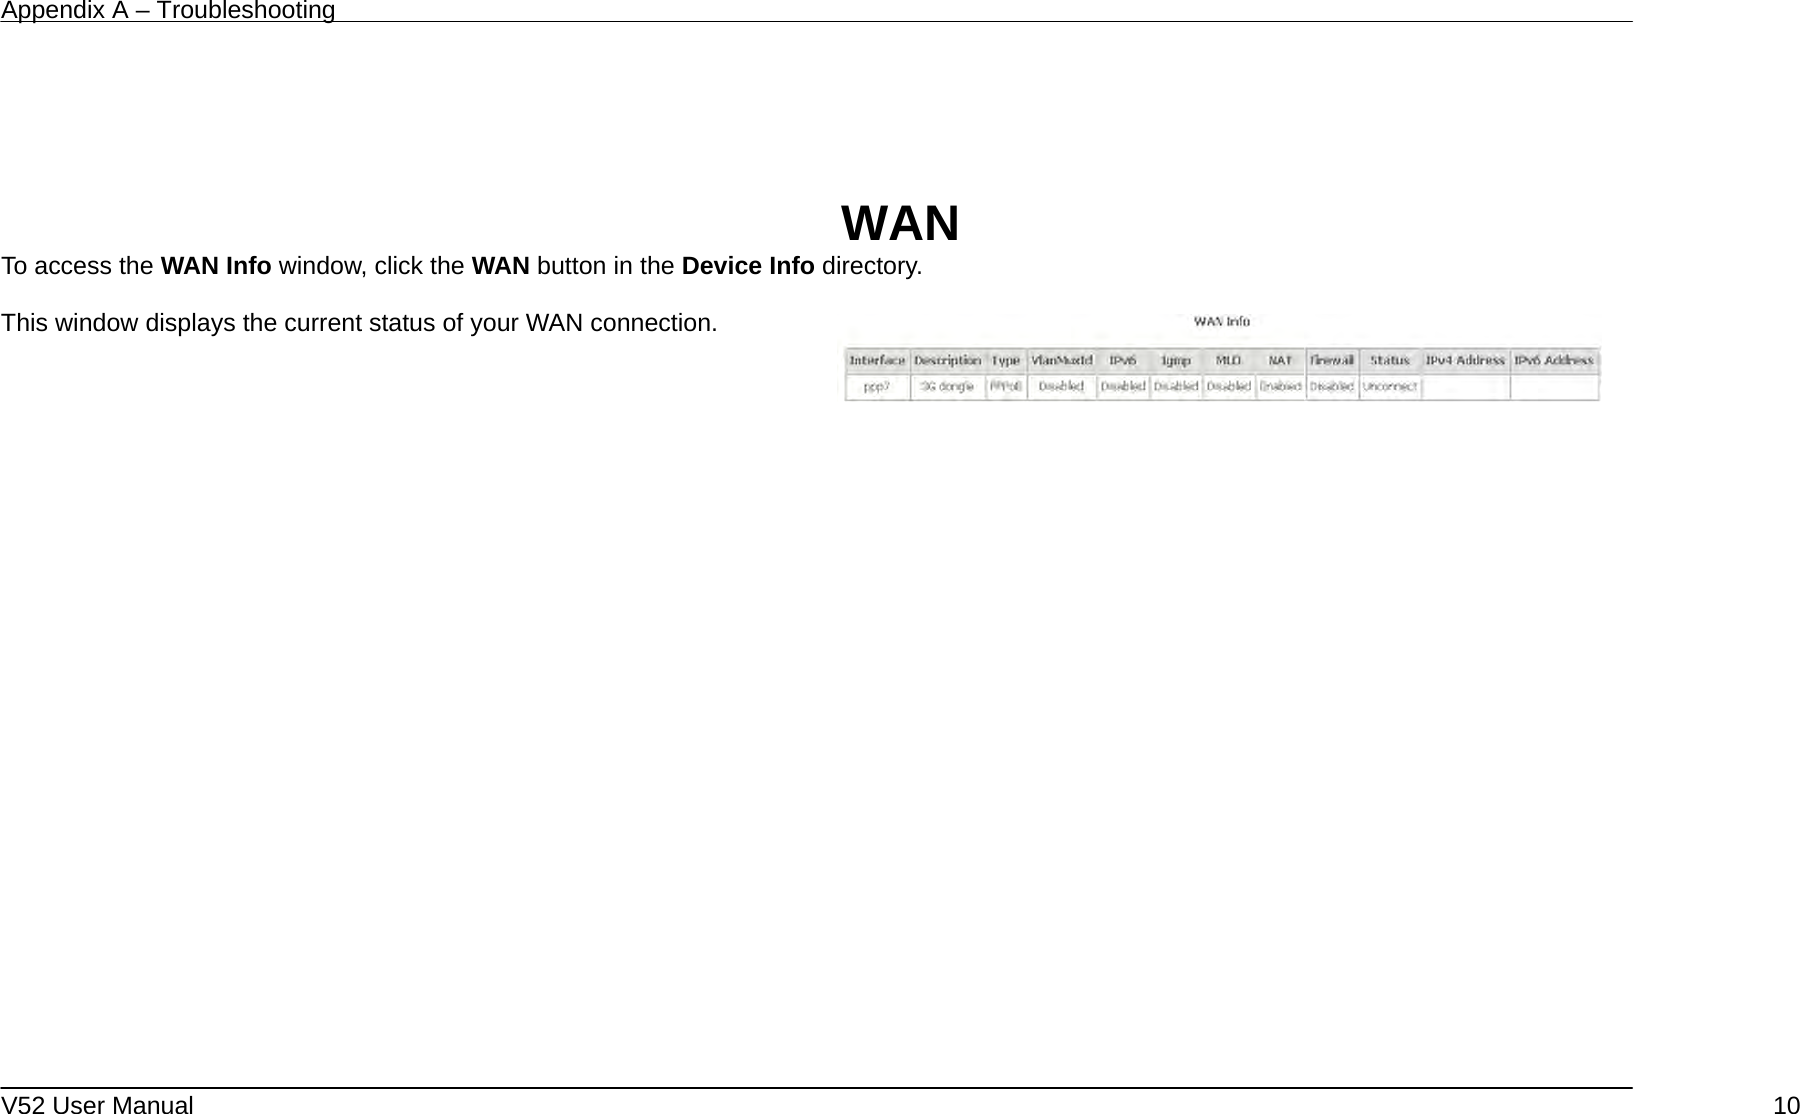 Appendix A – Troubleshooting   V52 User Manual    10   WAN To access the WAN Info window, click the WAN button in the Device Info directory.  This window displays the current status of your WAN connection.  